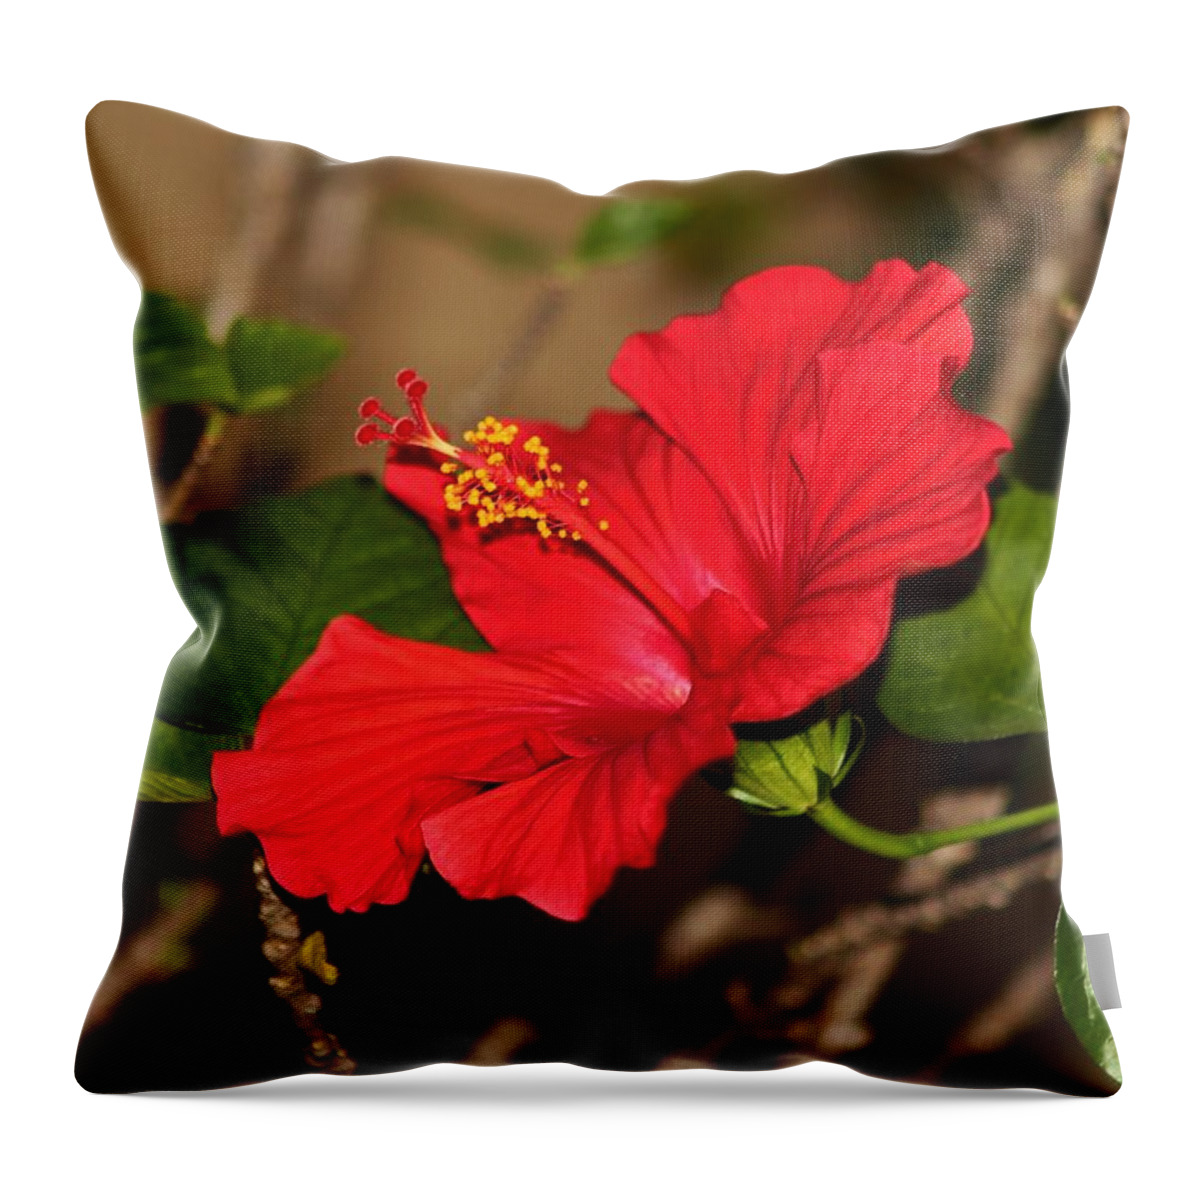 Red Throw Pillow featuring the photograph Red Hibiscus Flower by Cynthia Guinn